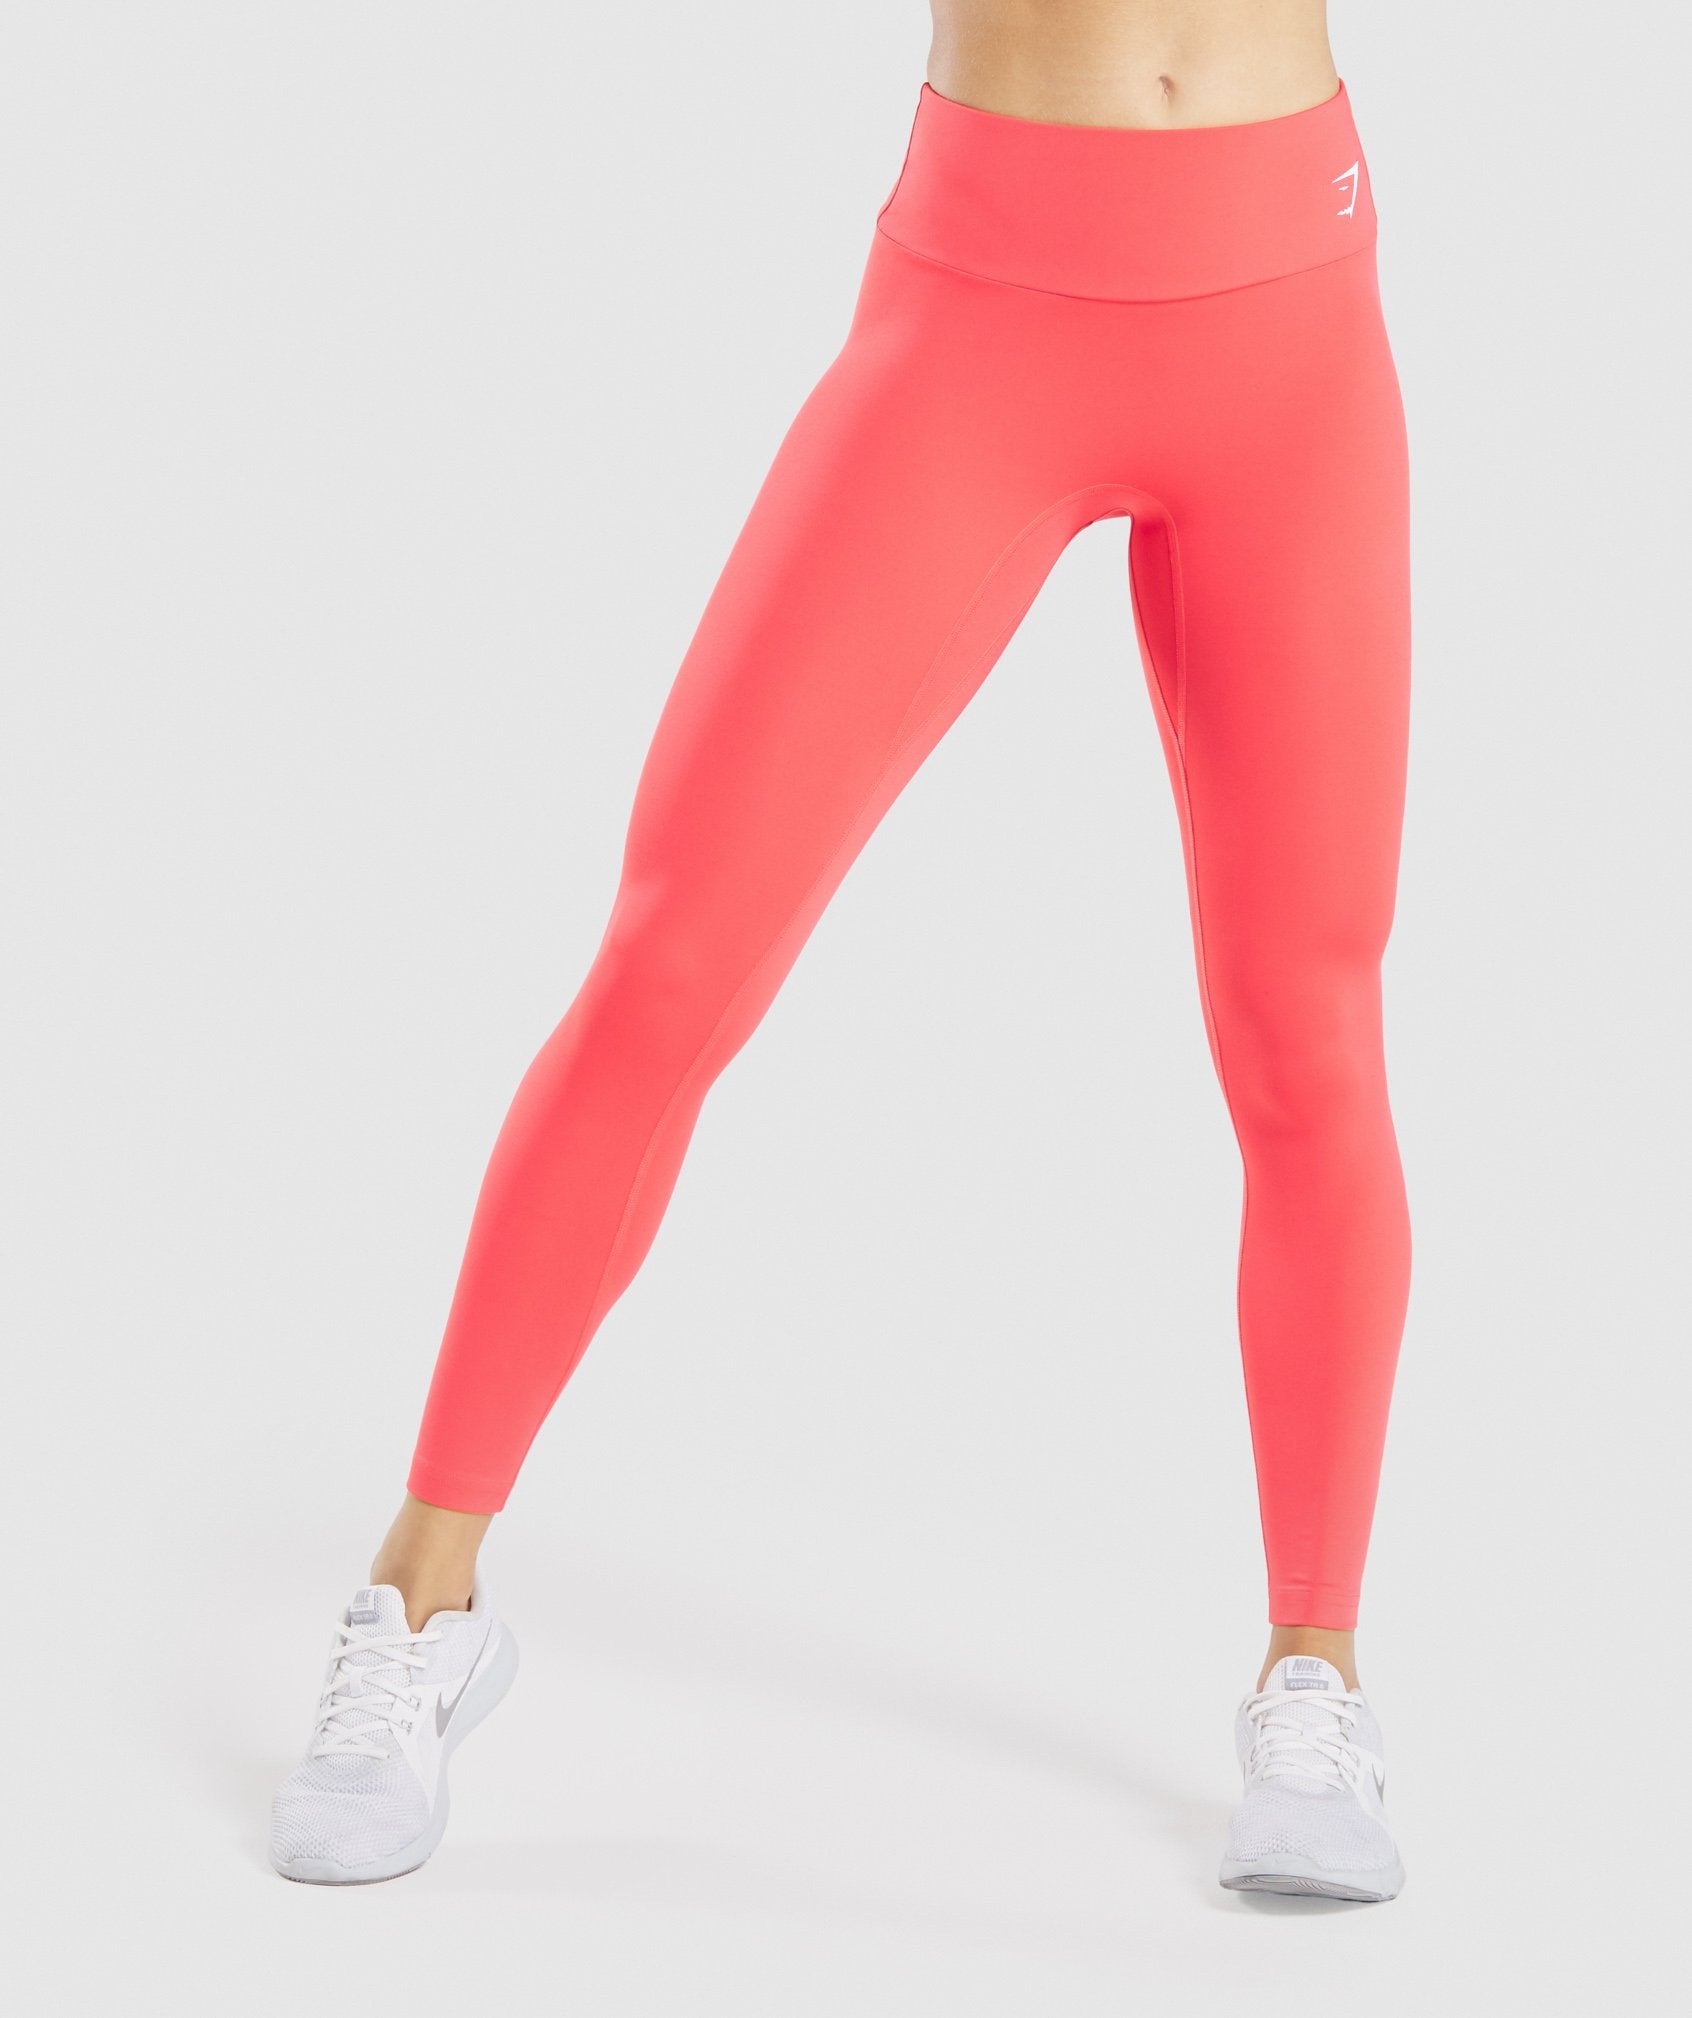 Gymshark Speed Leggings Red Size XS - $25 (50% Off Retail) - From kassidy